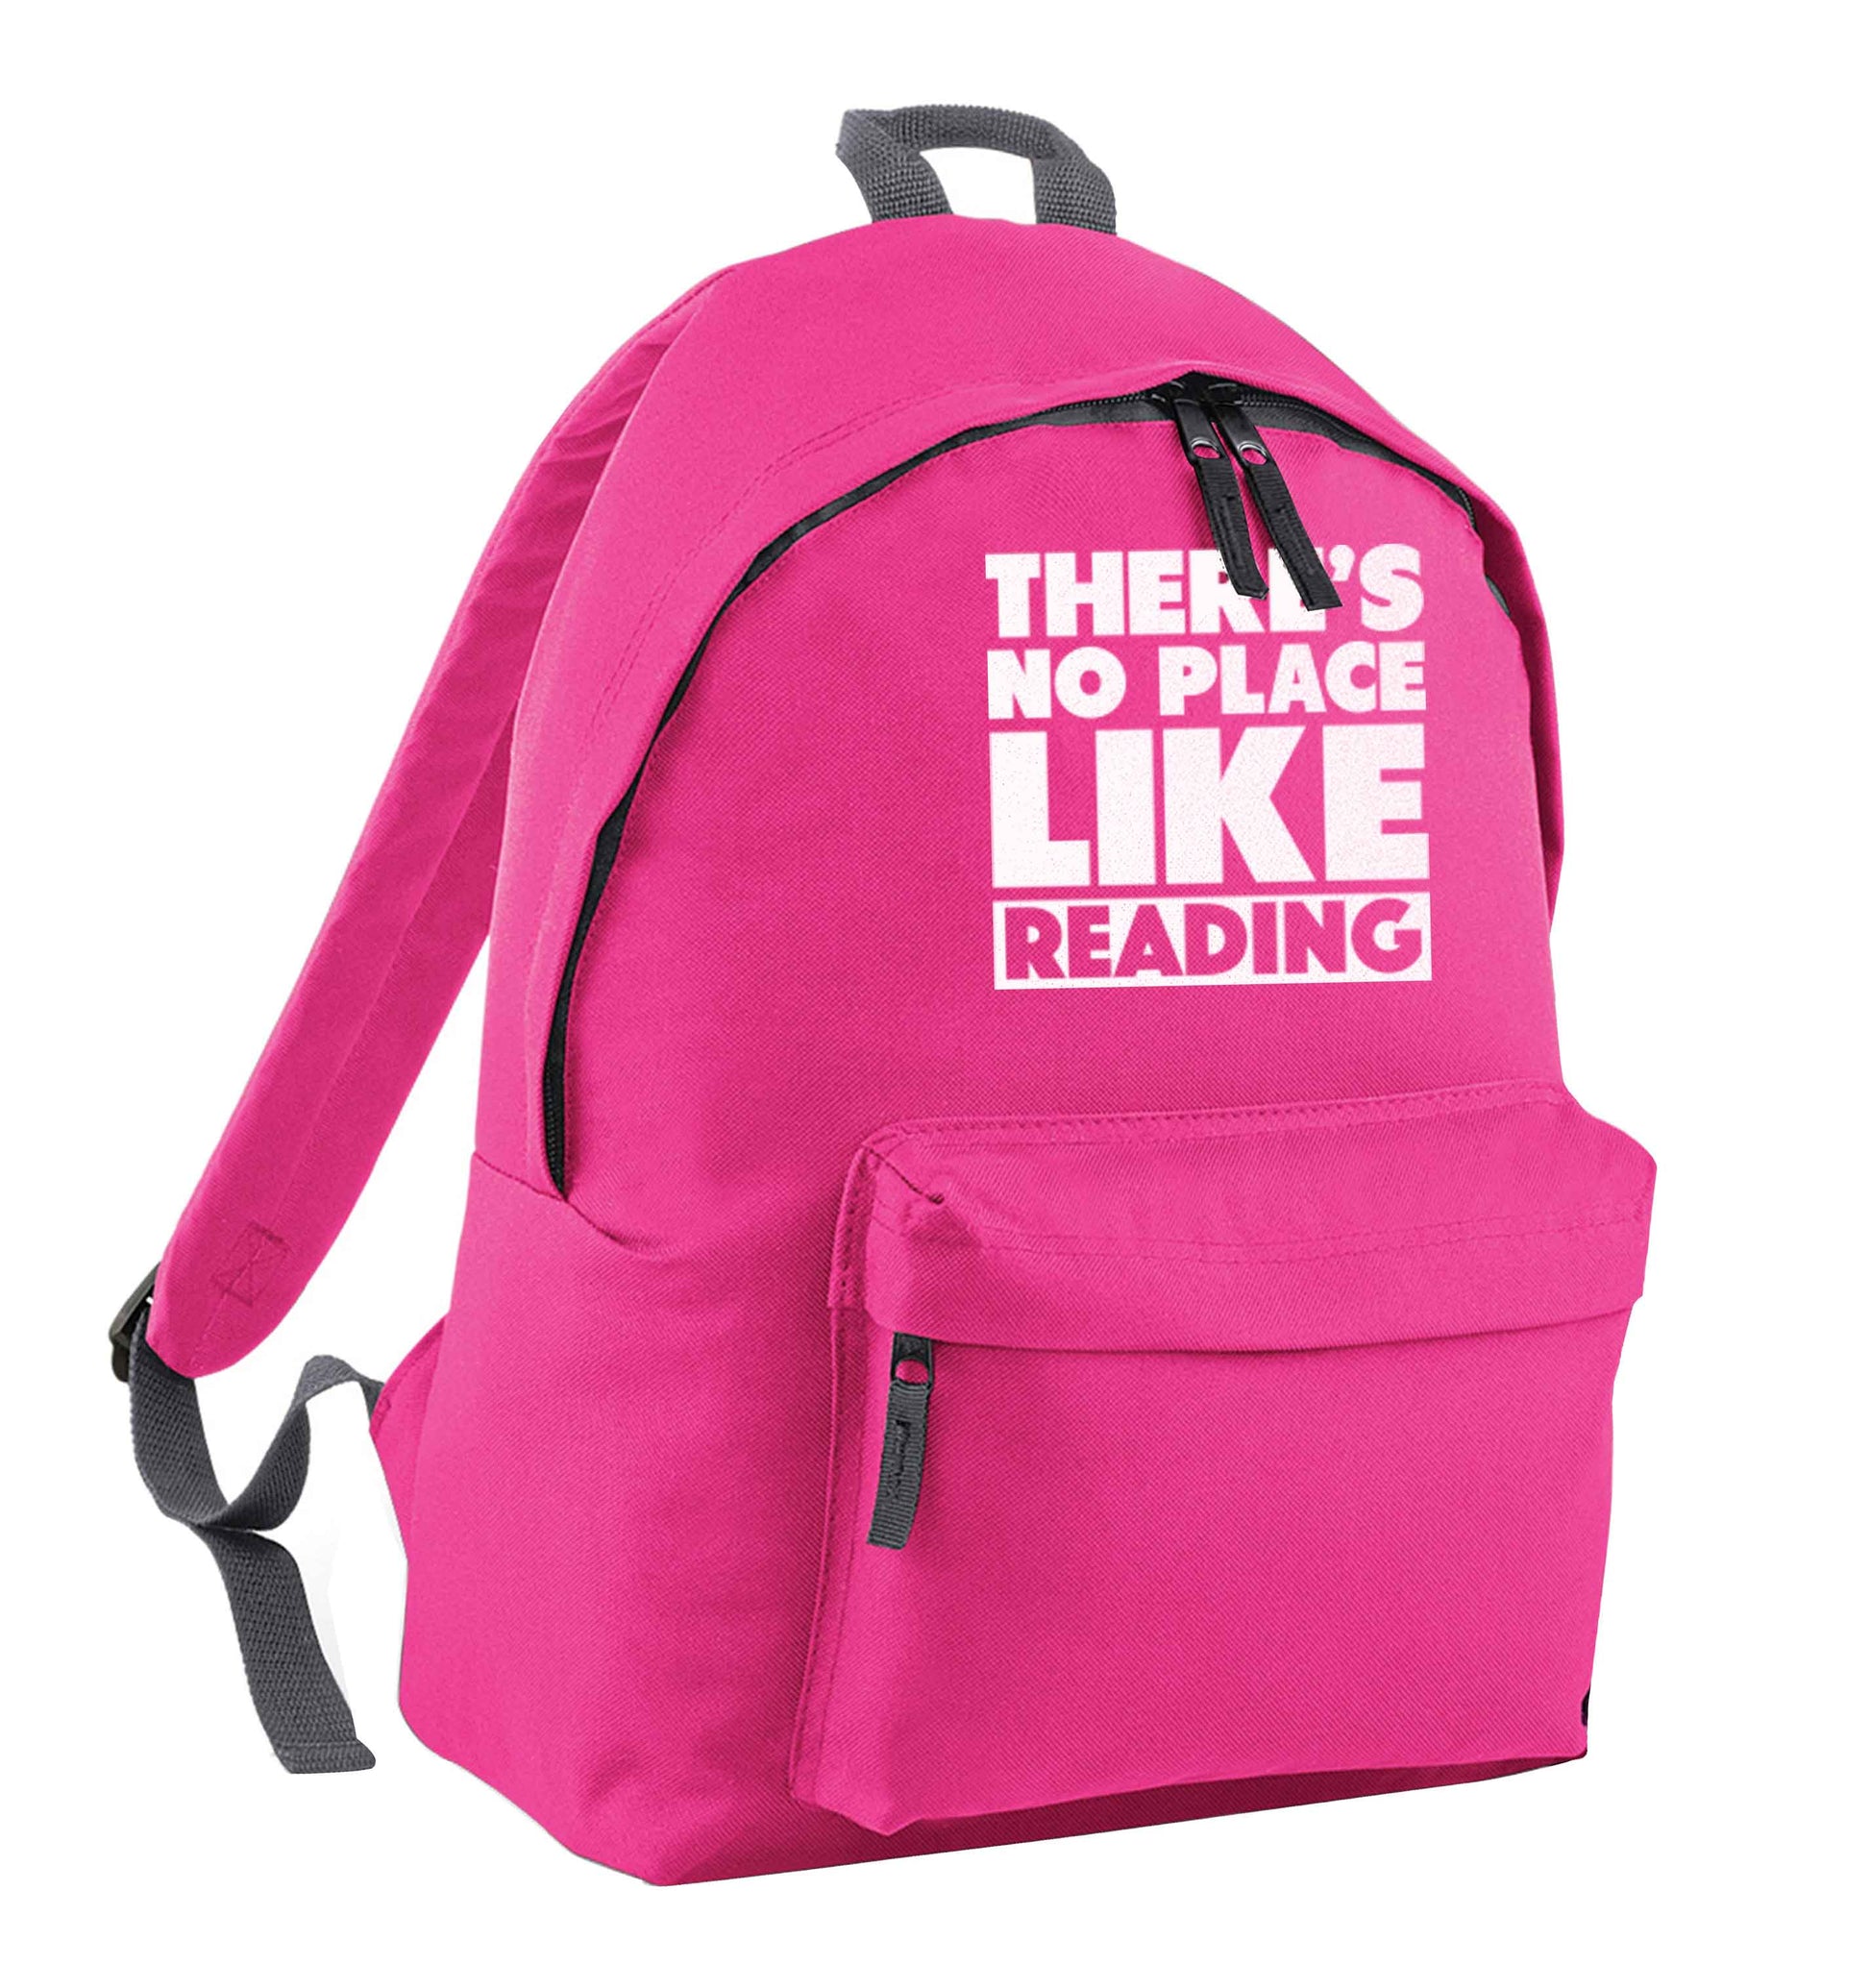 There's no place like Readingpink adults backpack